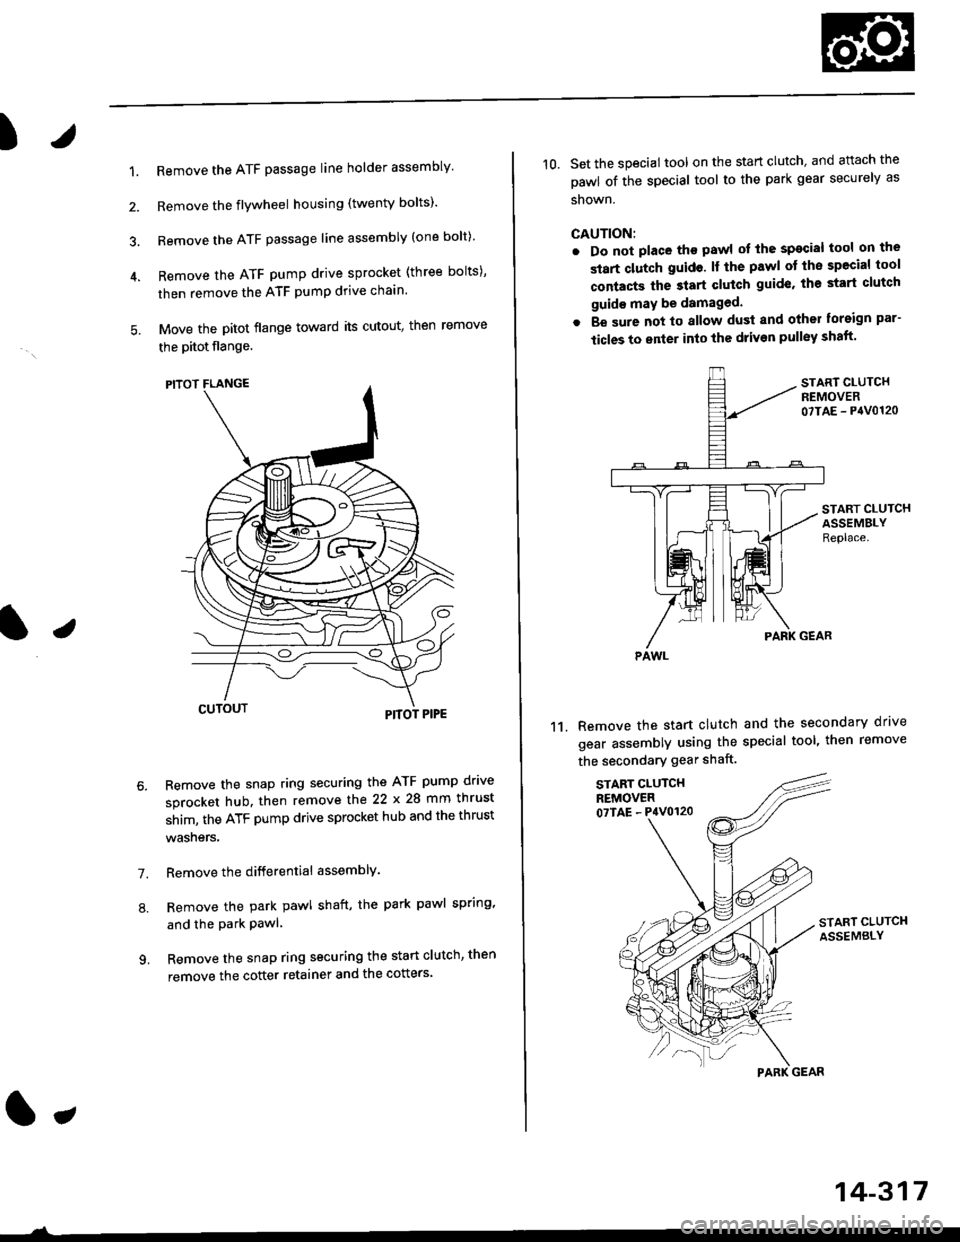 HONDA CIVIC 2000 6.G Workshop Manual )
1.Remove the ATF passage line holder assembly
Remove the flywheel housing (twenty bolts)
Remove the ATF passage line assembly (one bolt)
Remove the ATF pump drive sprocket (three bolts),
then remo